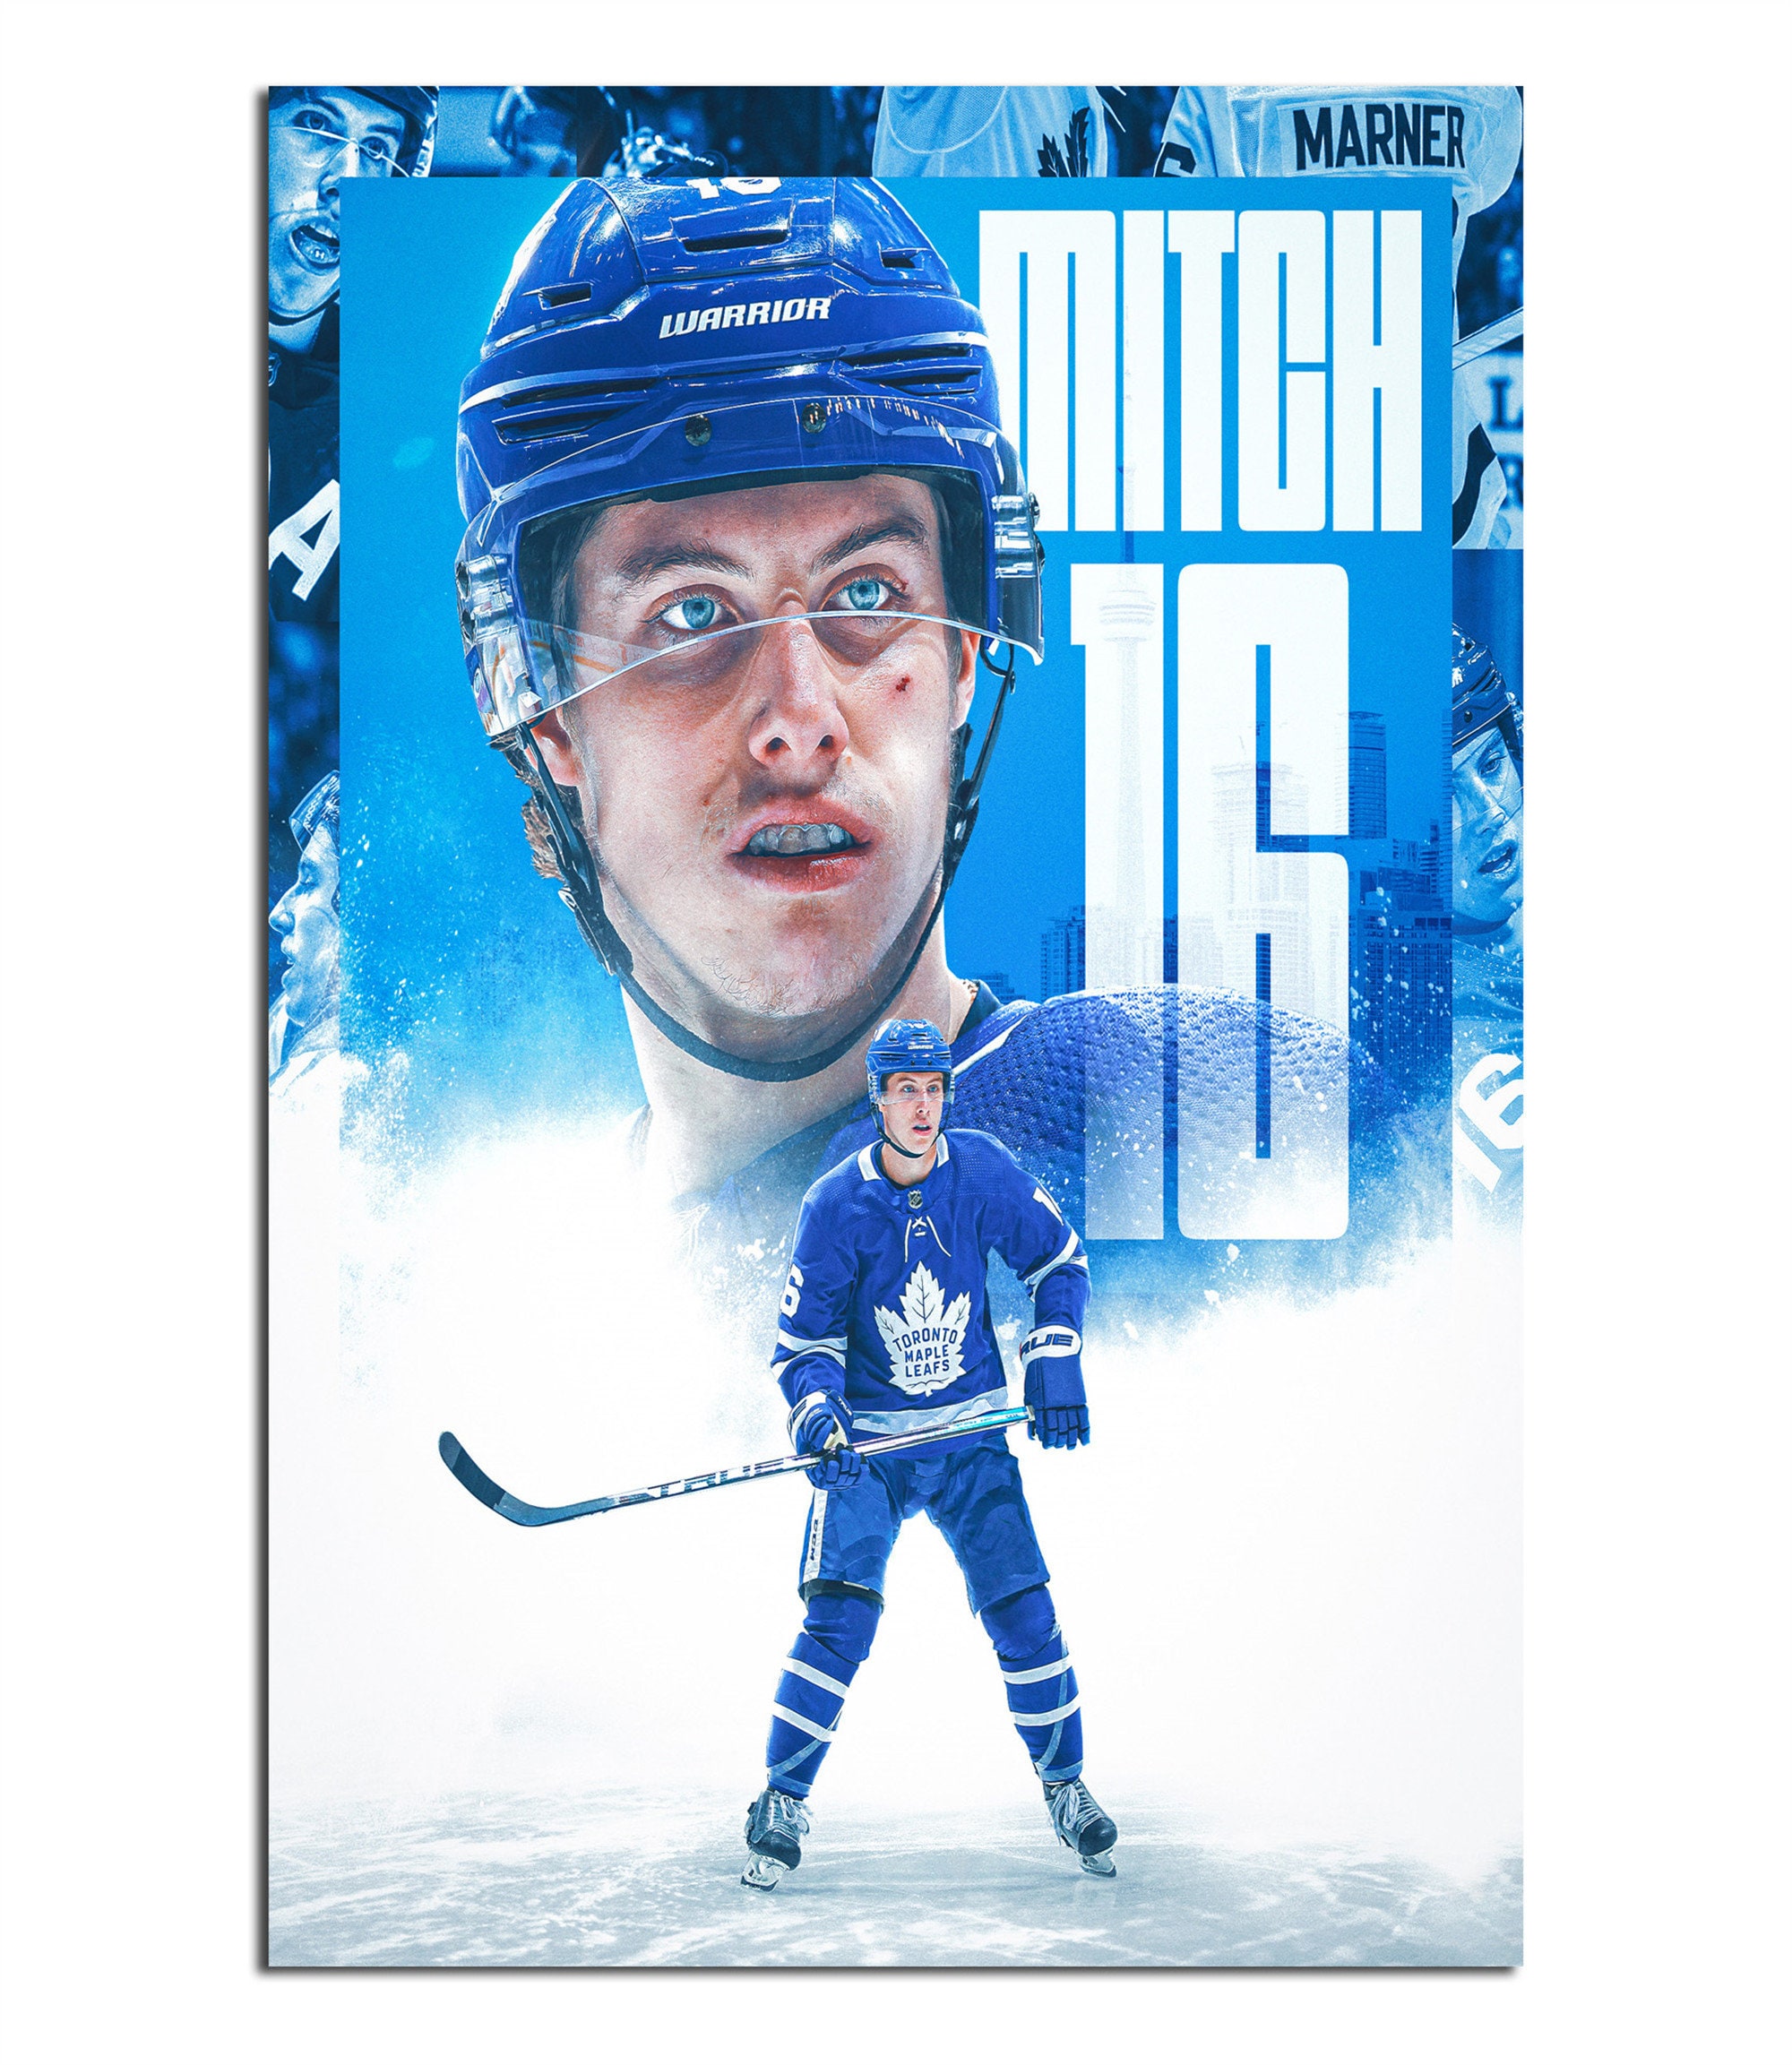 Toronto Maple Leafs Outer Stuff Name & Number Youth Shirt - Mitch Marn